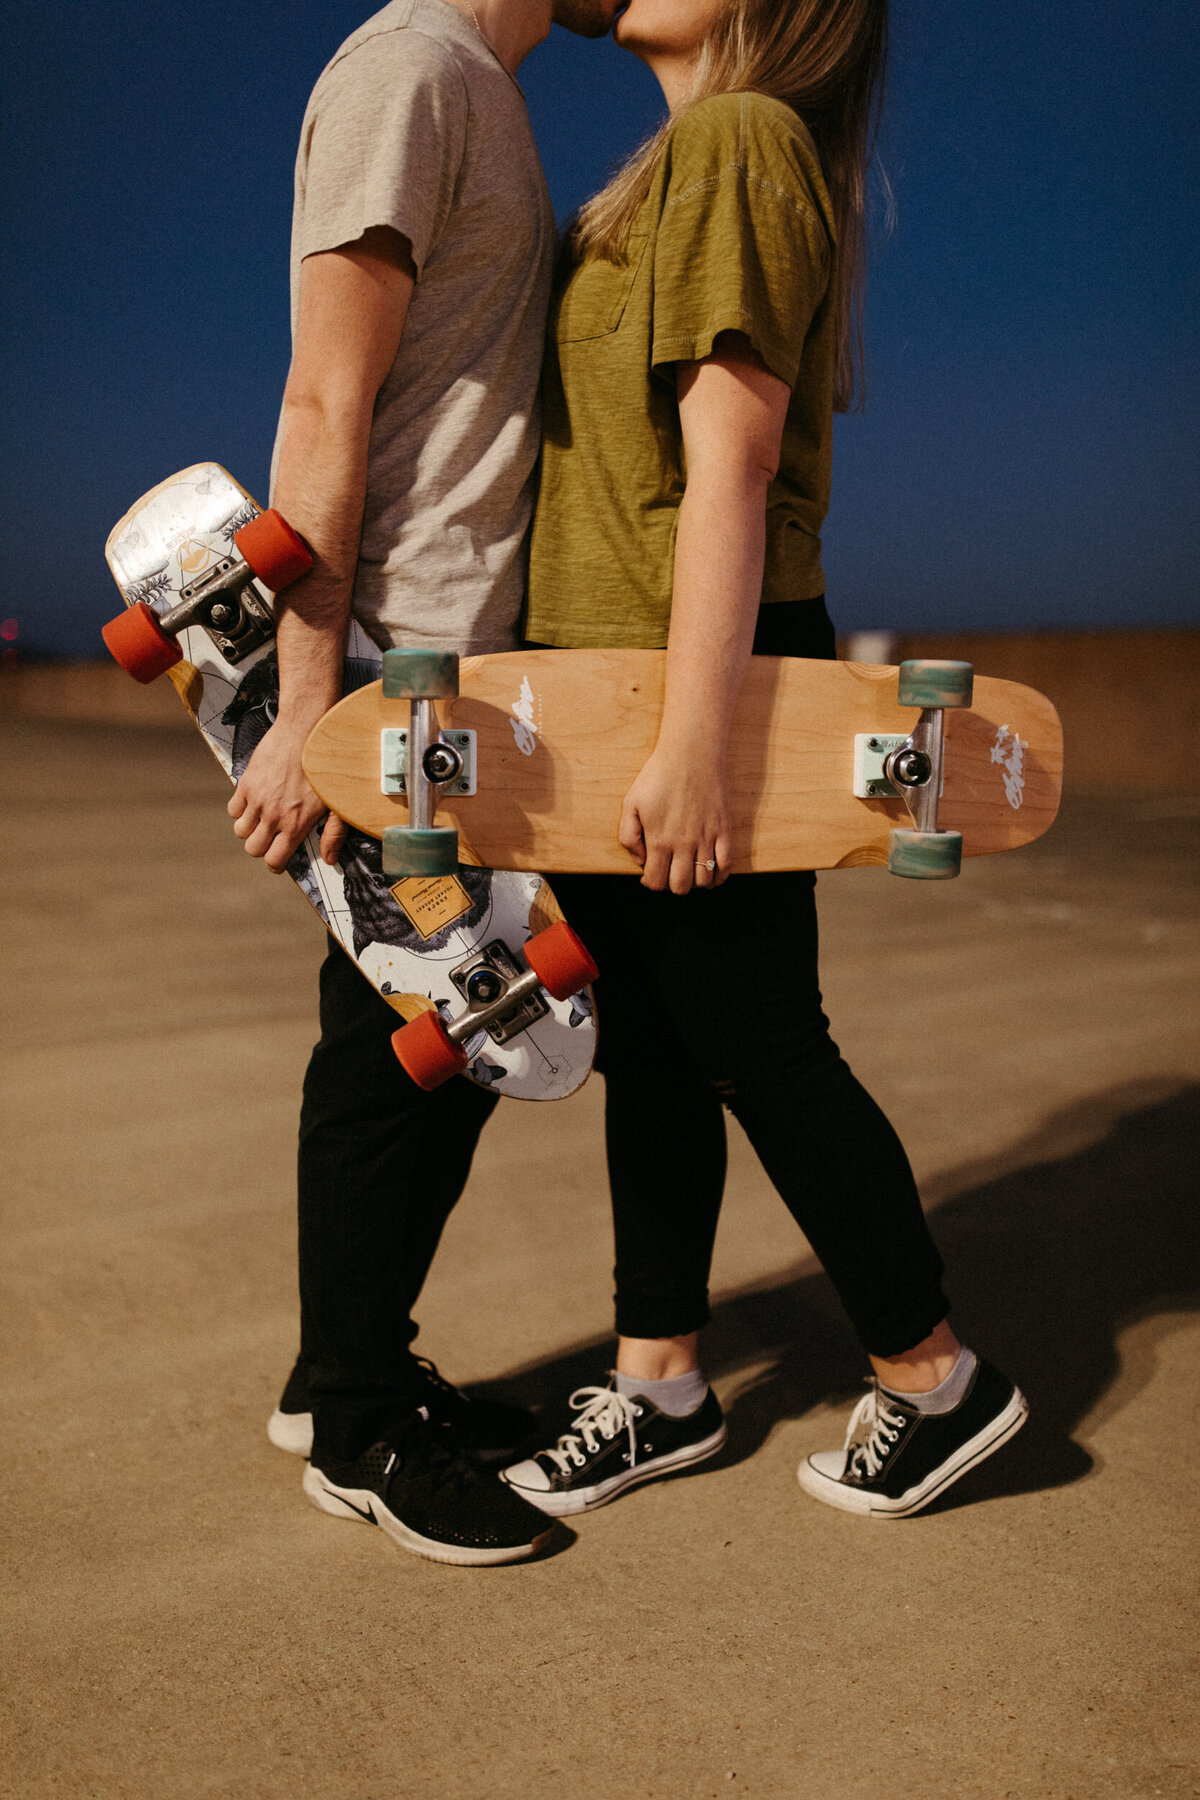 A couple is holding skateboards and kissing each other on top of a parking garage at night.